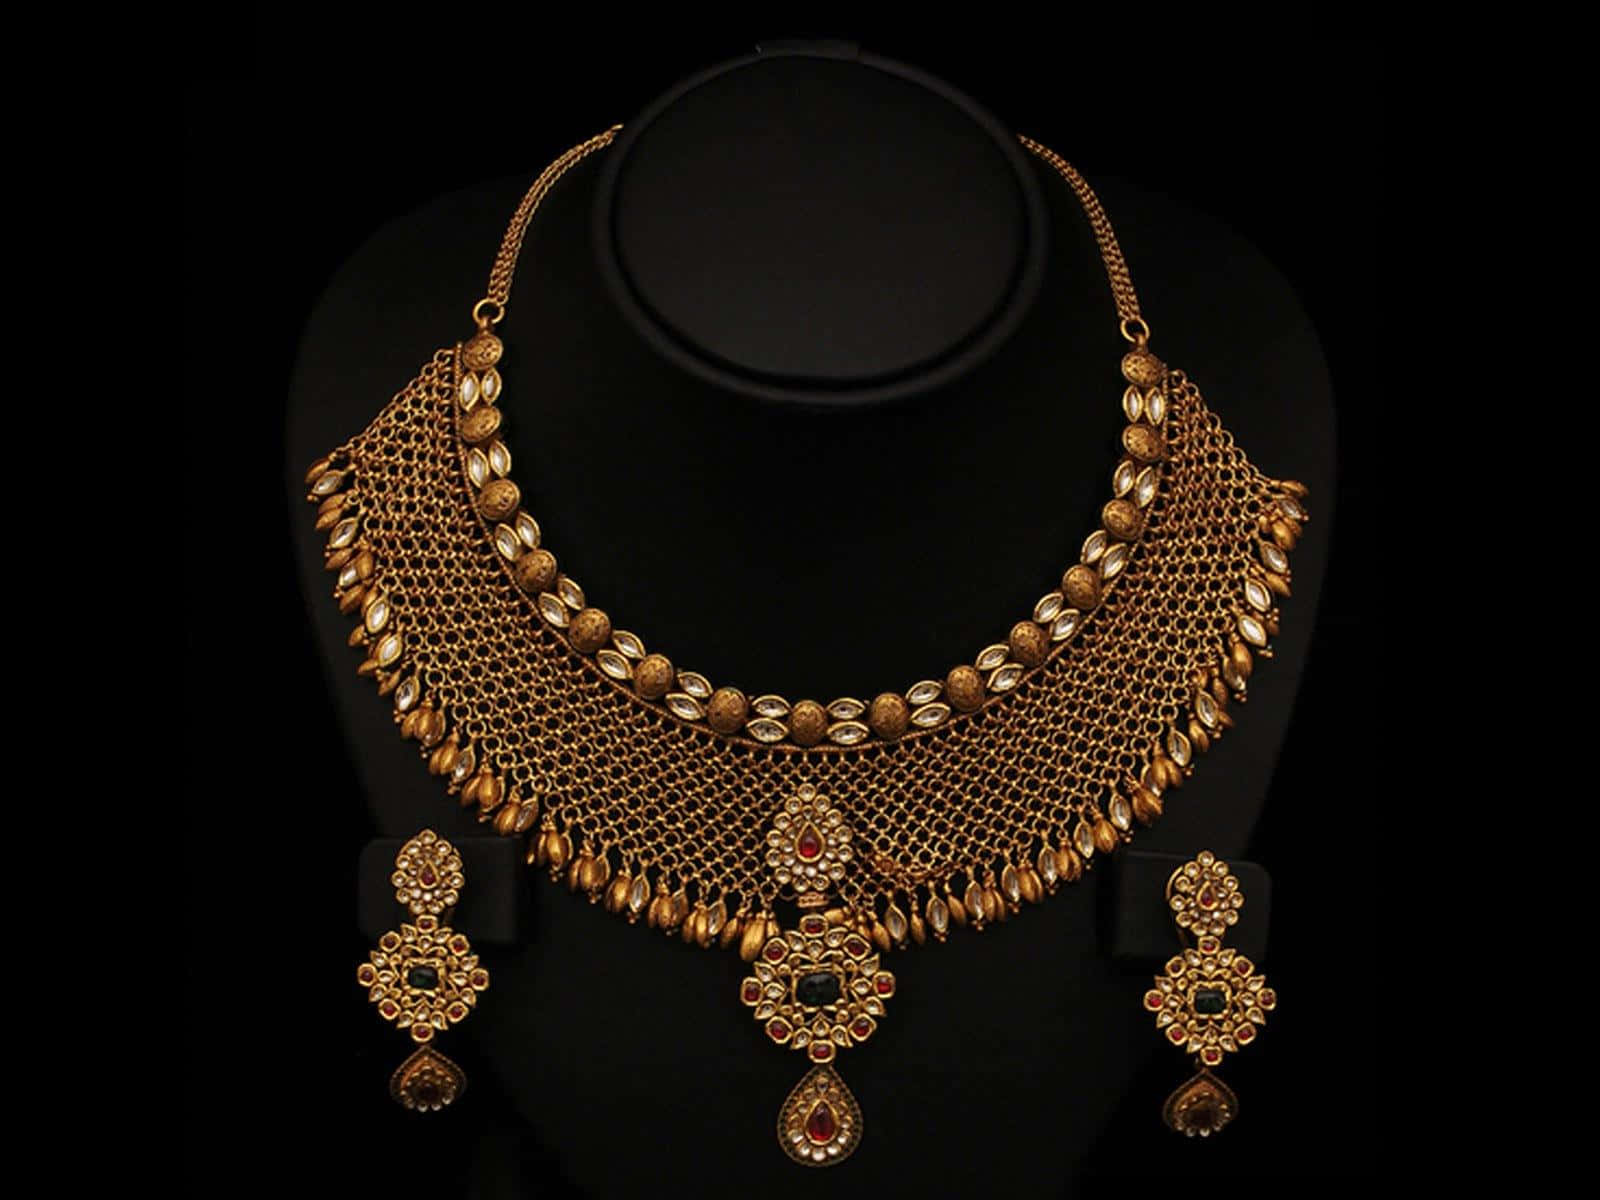 Experience luxury with exquisite gold jewellery.